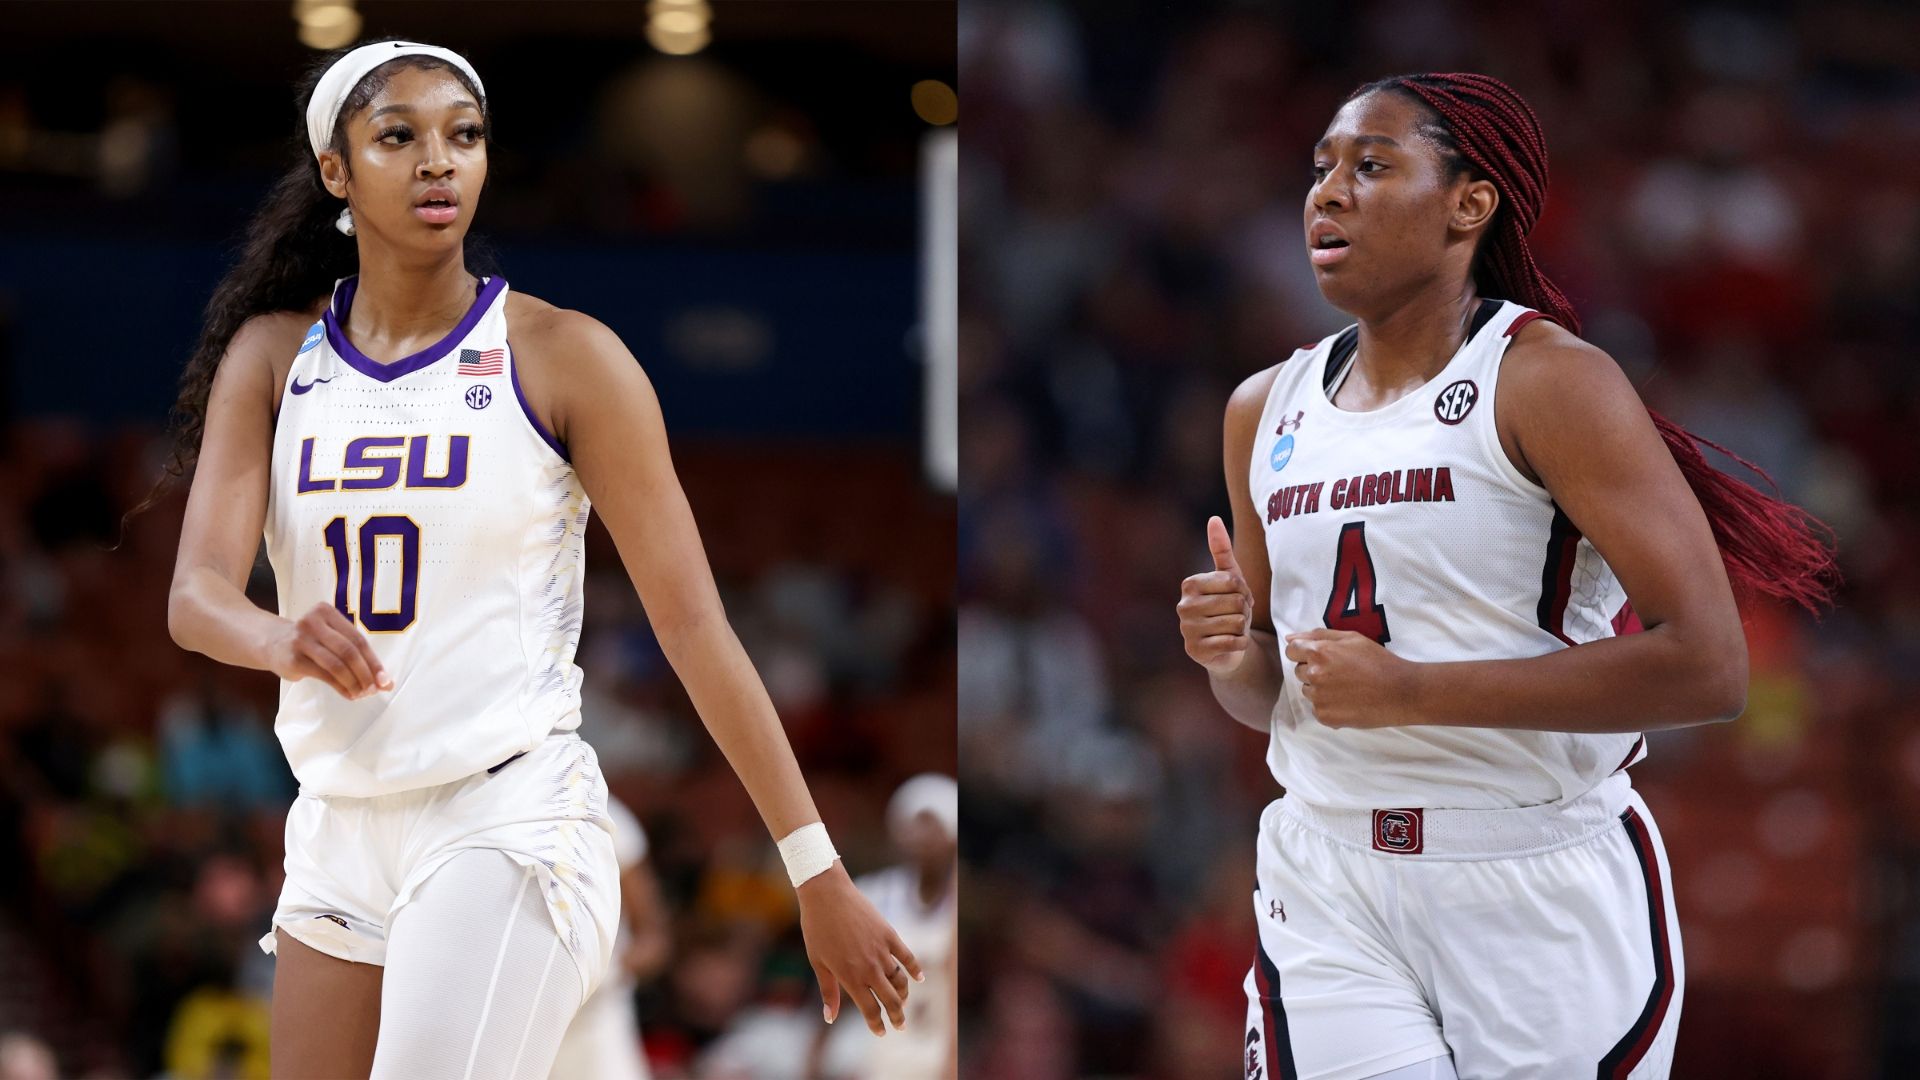 Boston, Reese say SEC prepared them for Final Four